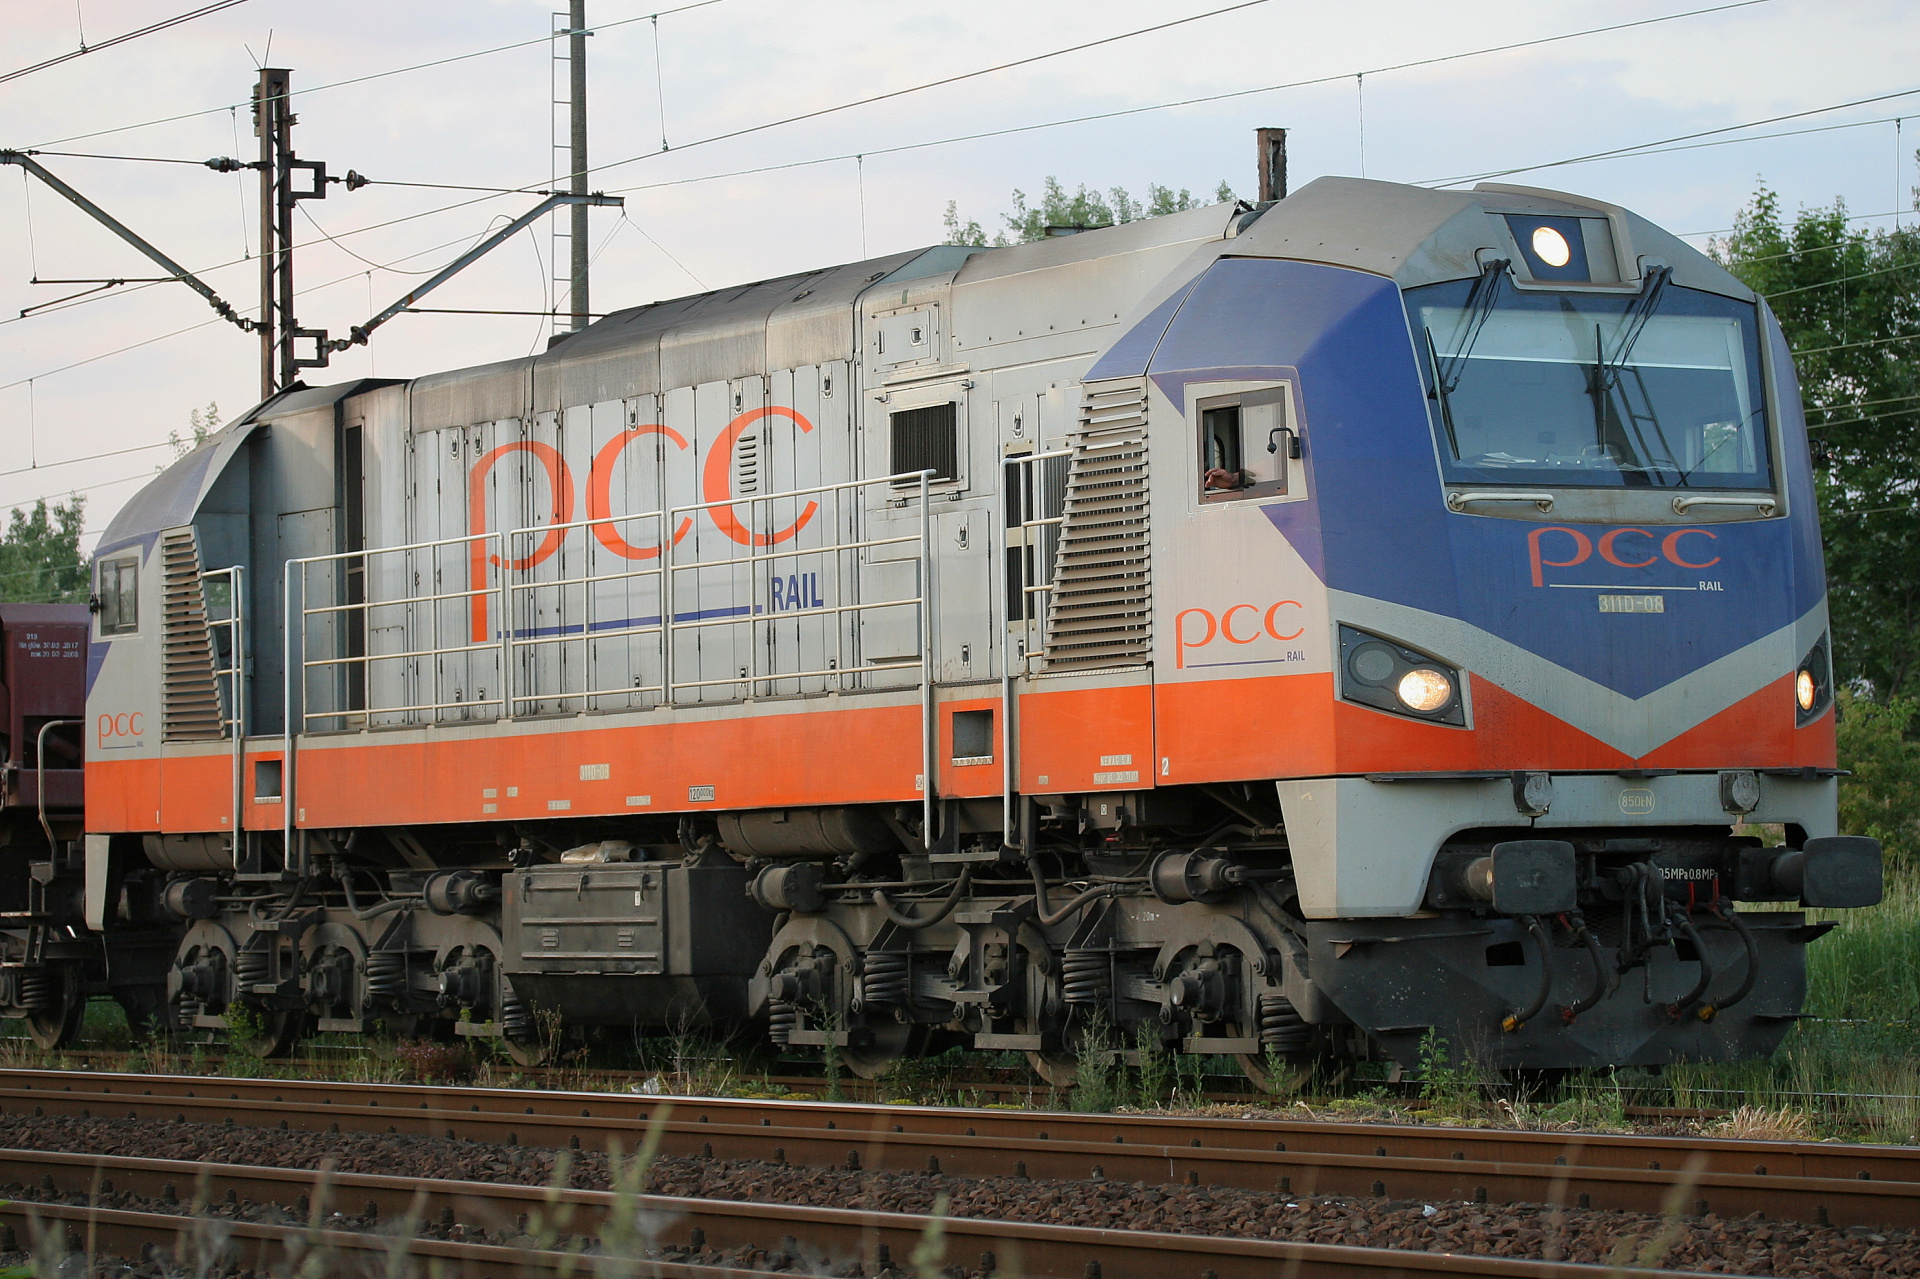 Newag 311D-08 (Vehicles » Trains and Locomotives)